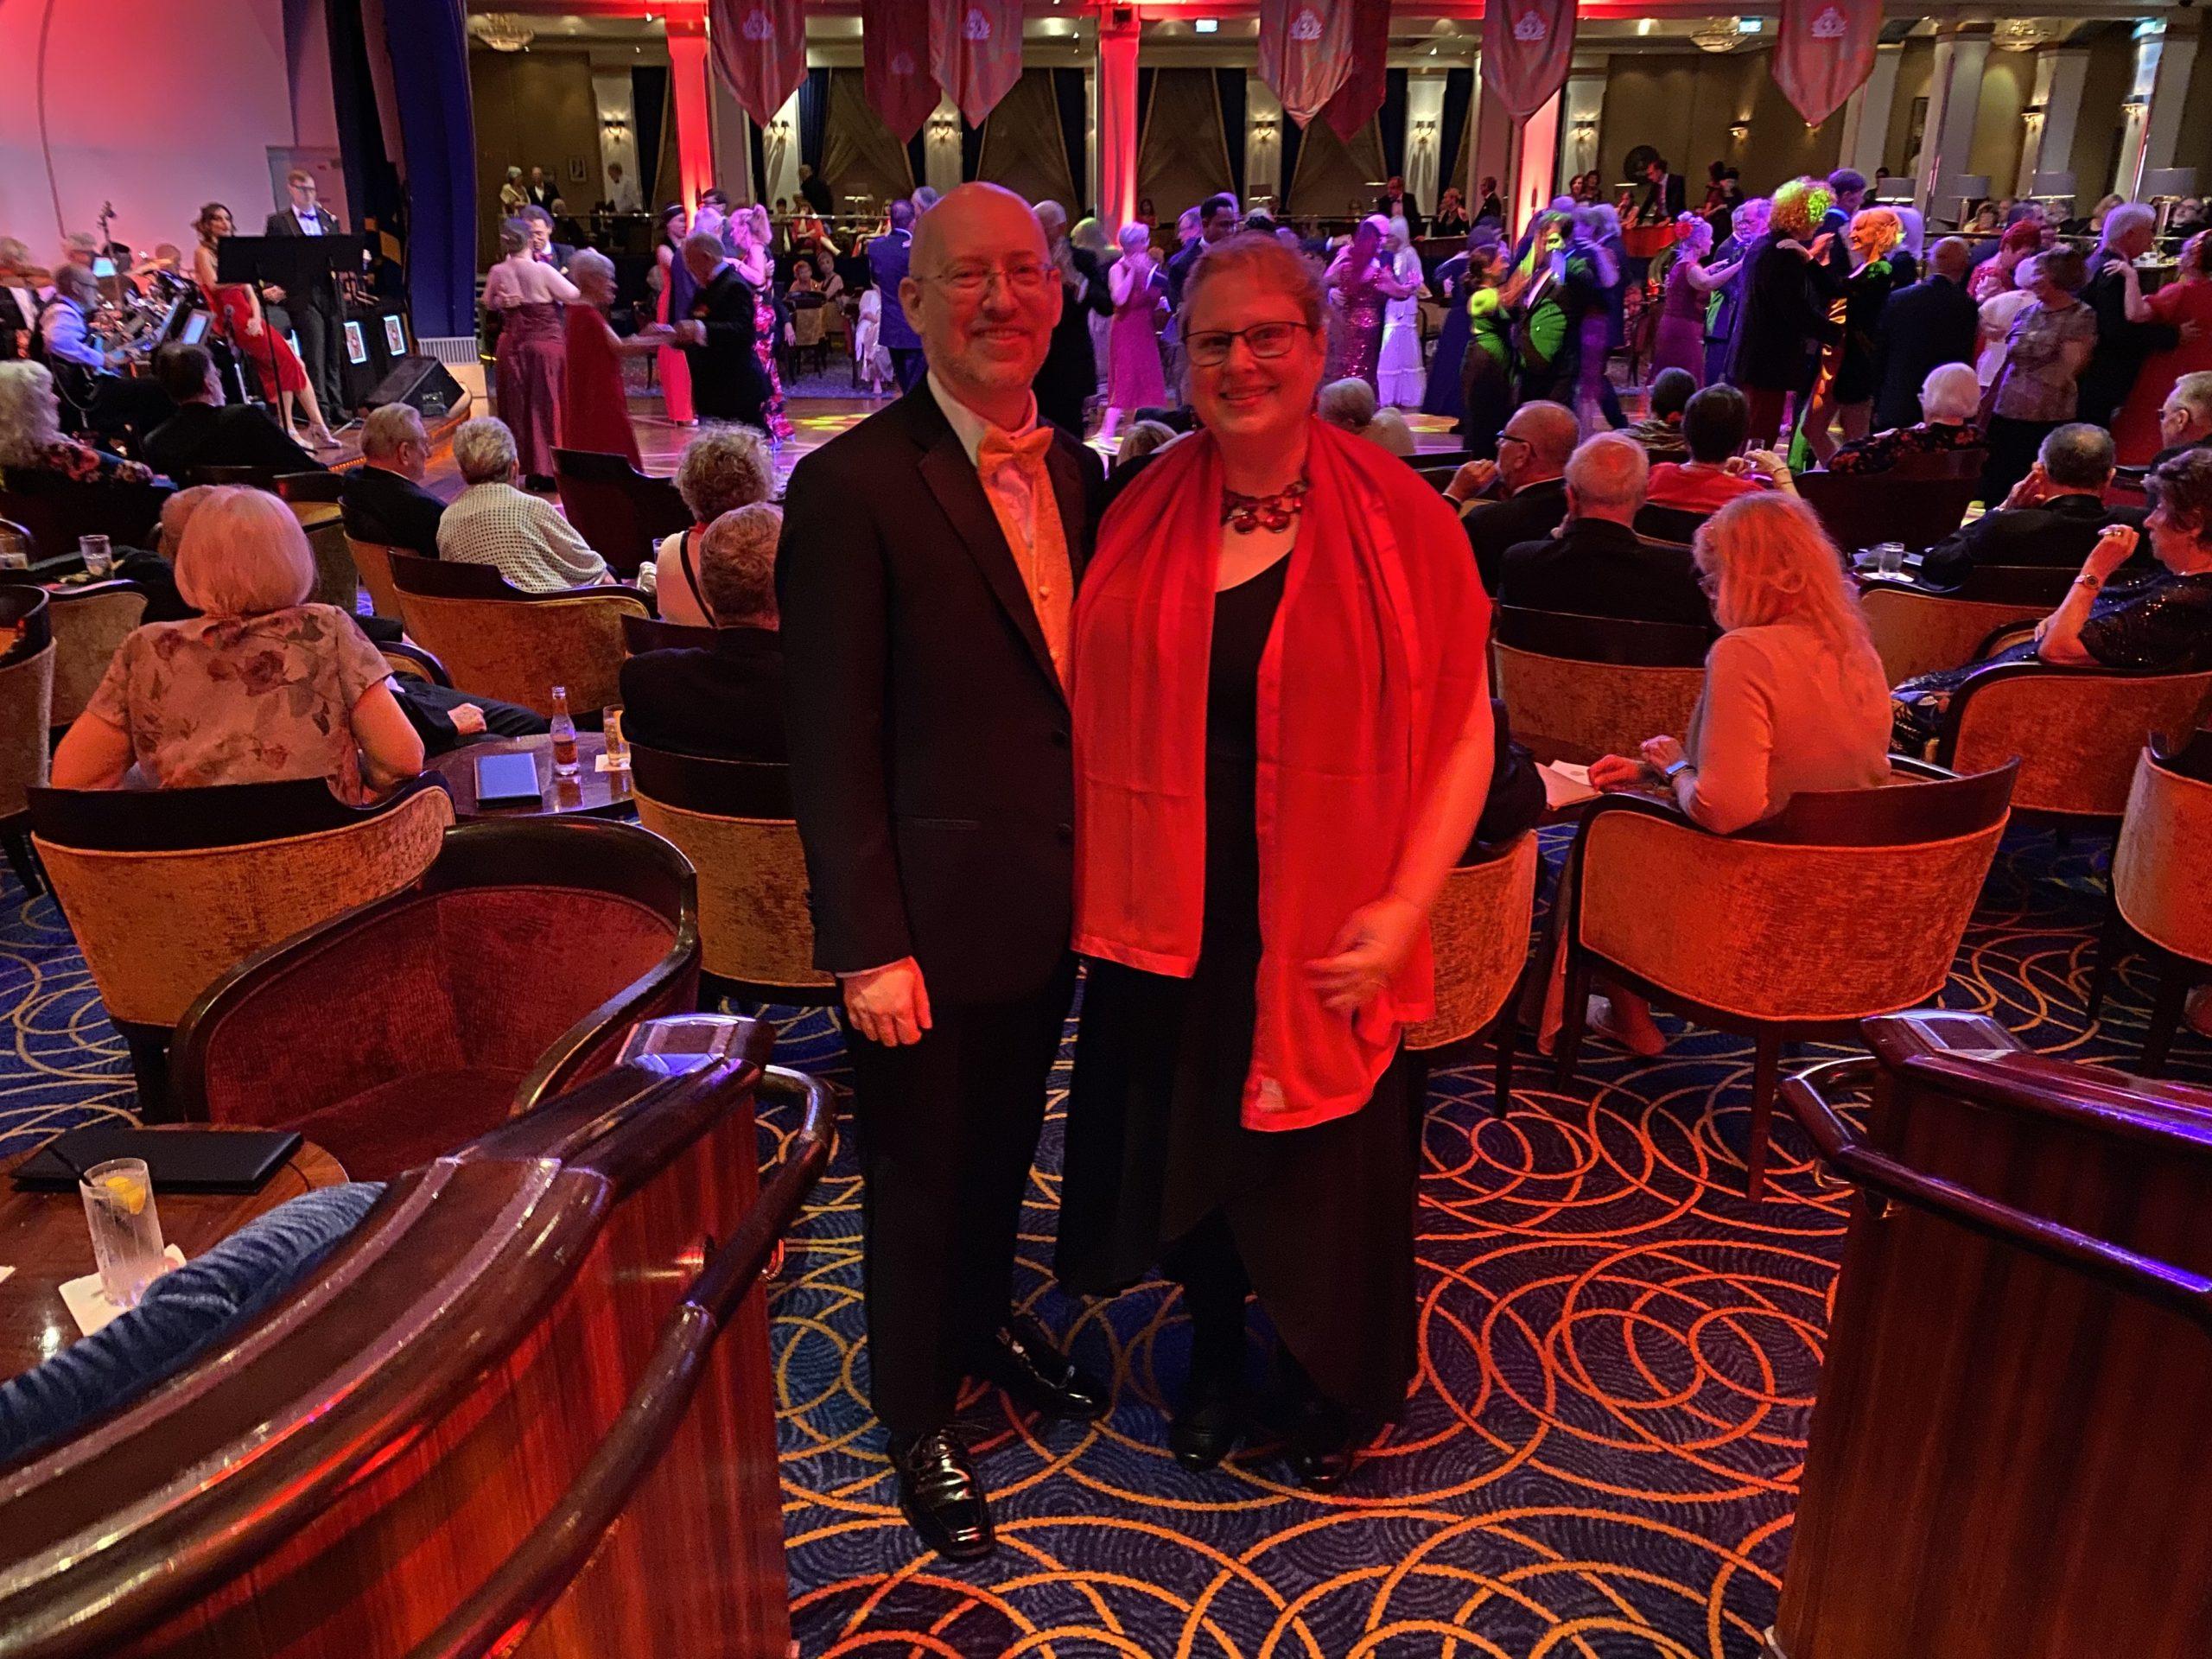 My wife and I in formal dress at a fancy event. I'm wearing a tux with gold vest and bow tie, she's wearing a black dress with red wrap and jewelry. Visible behind us are a number of people ballroom dancing to a live band while other people sit in chairs and watch.